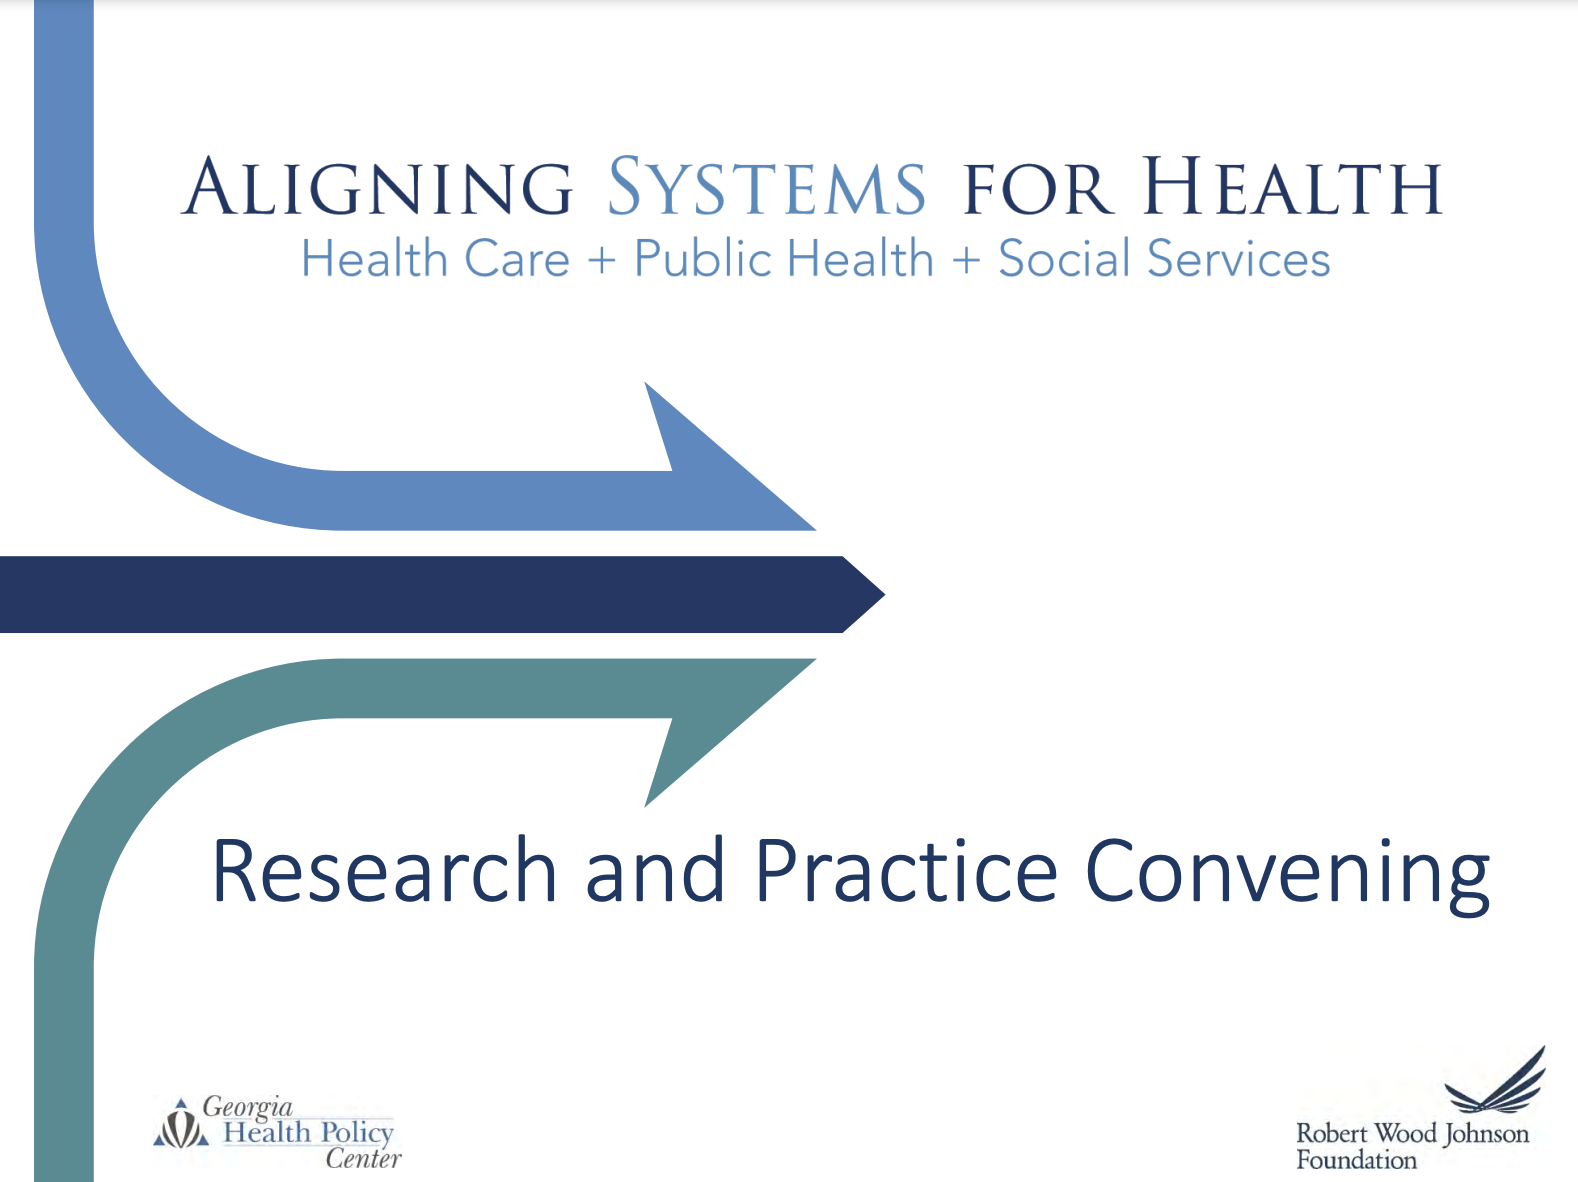 Aligning Systems for Health Research and Practice Convening 2021